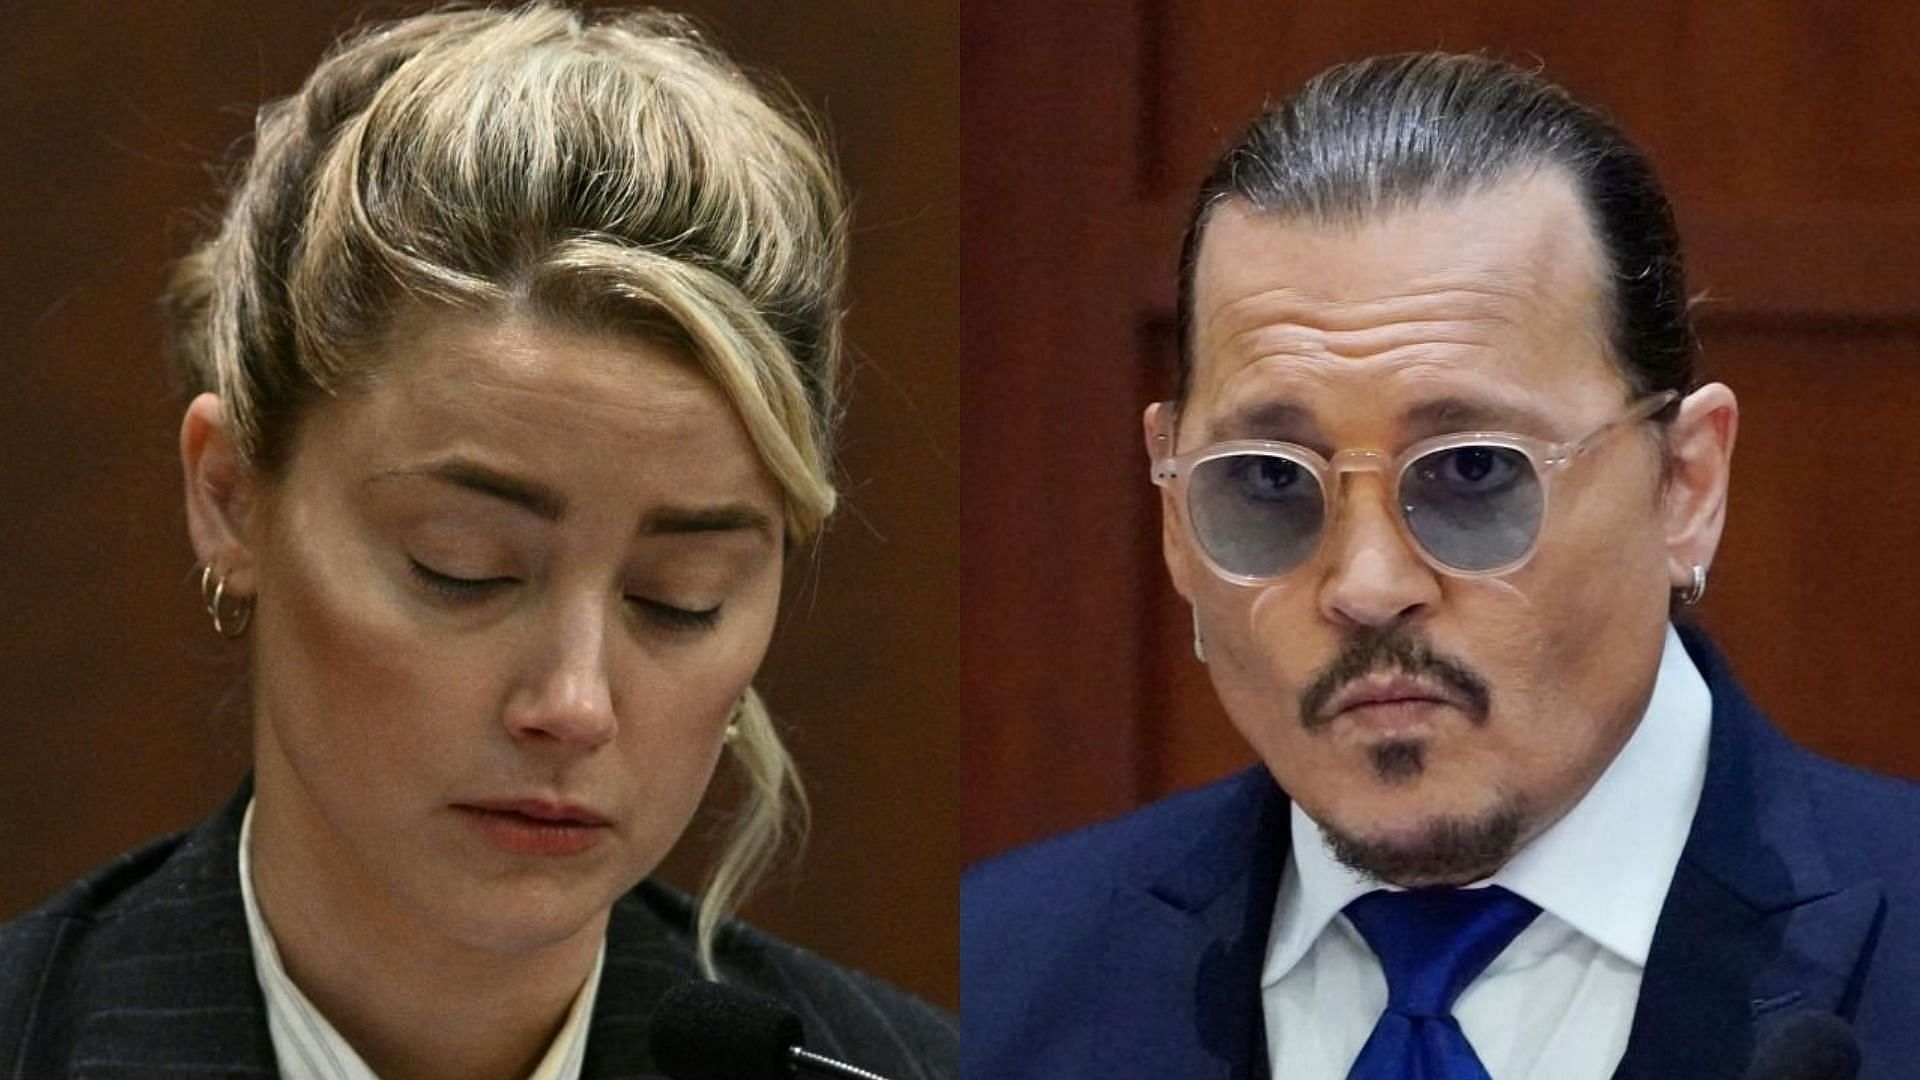 Alleged juror shares his views on Johnny Depp-Amber Heard defamation trial (Image via Getty Images)